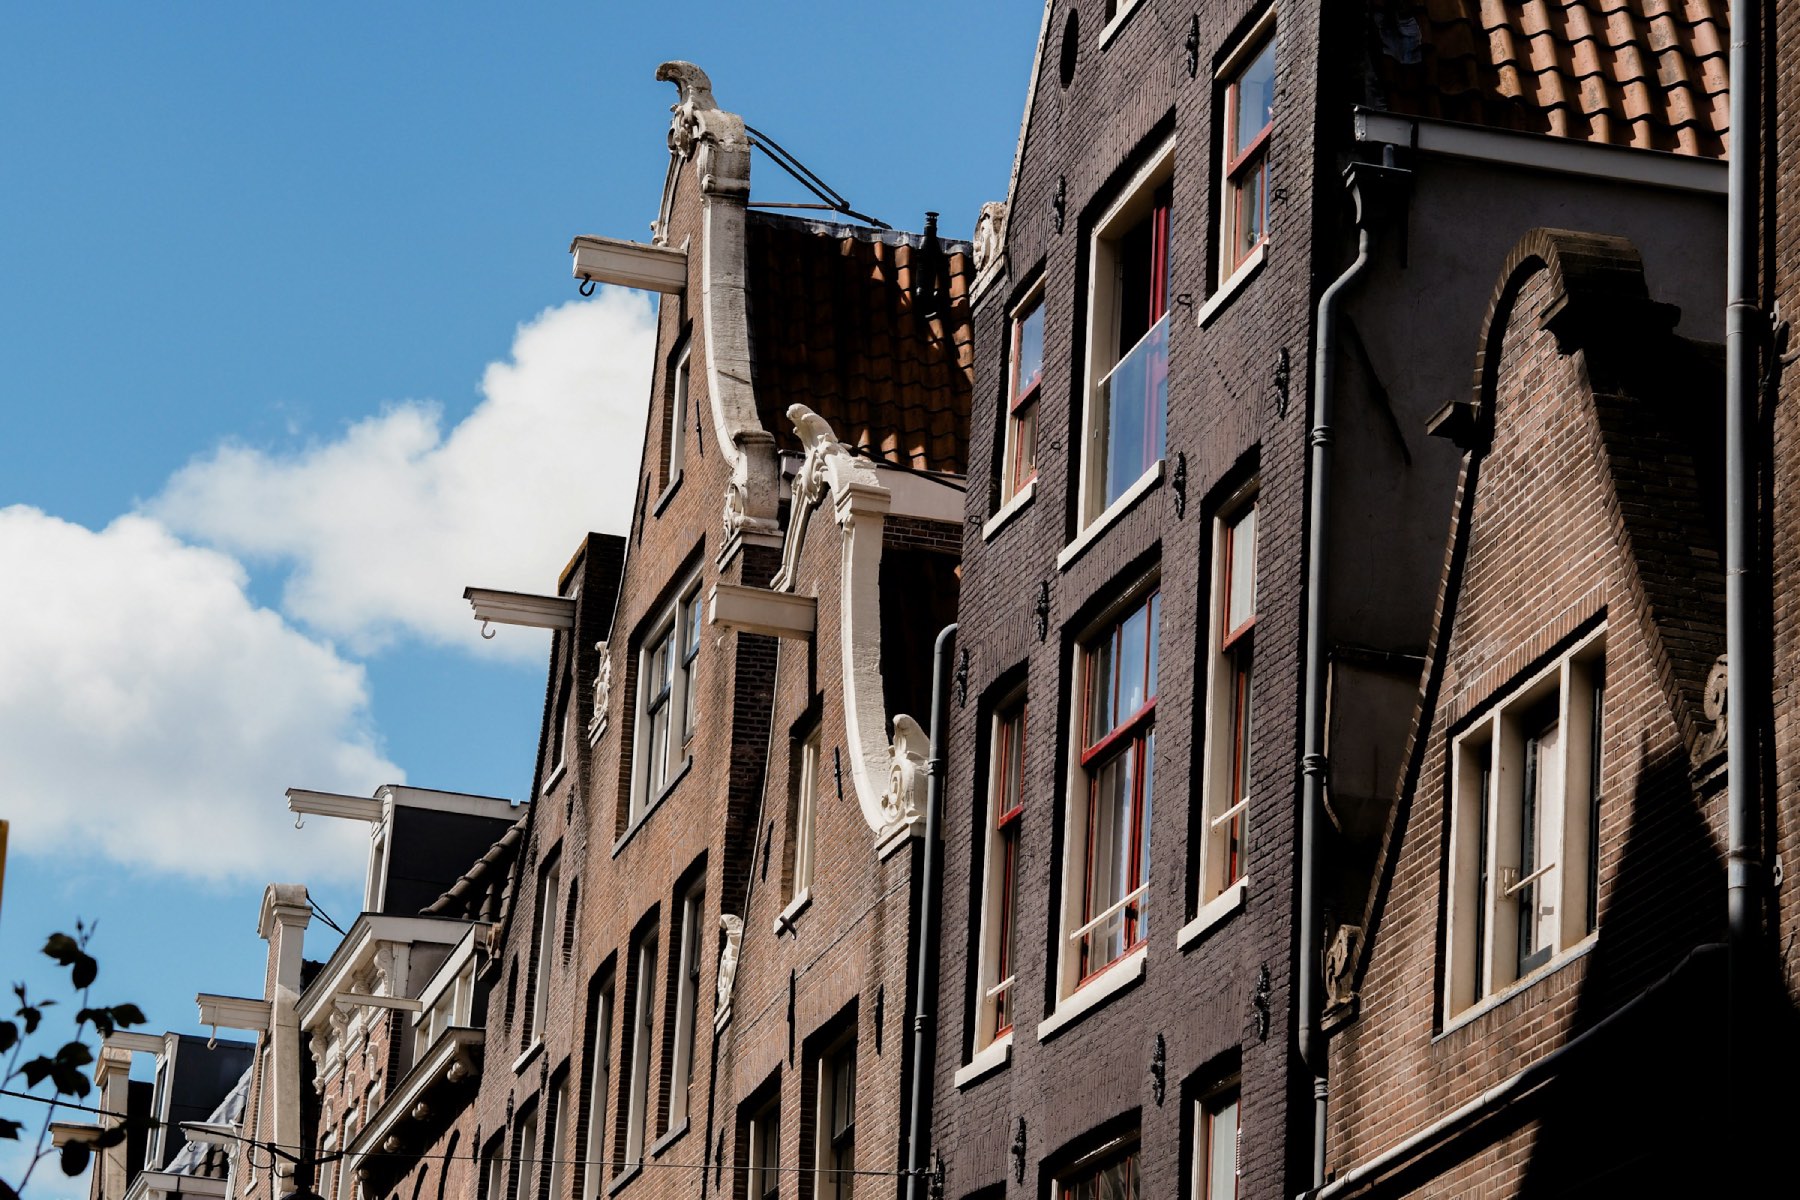 Gabled houses in Amsterdam with beams and iron hooks sticking out from the top against a bright blue sky